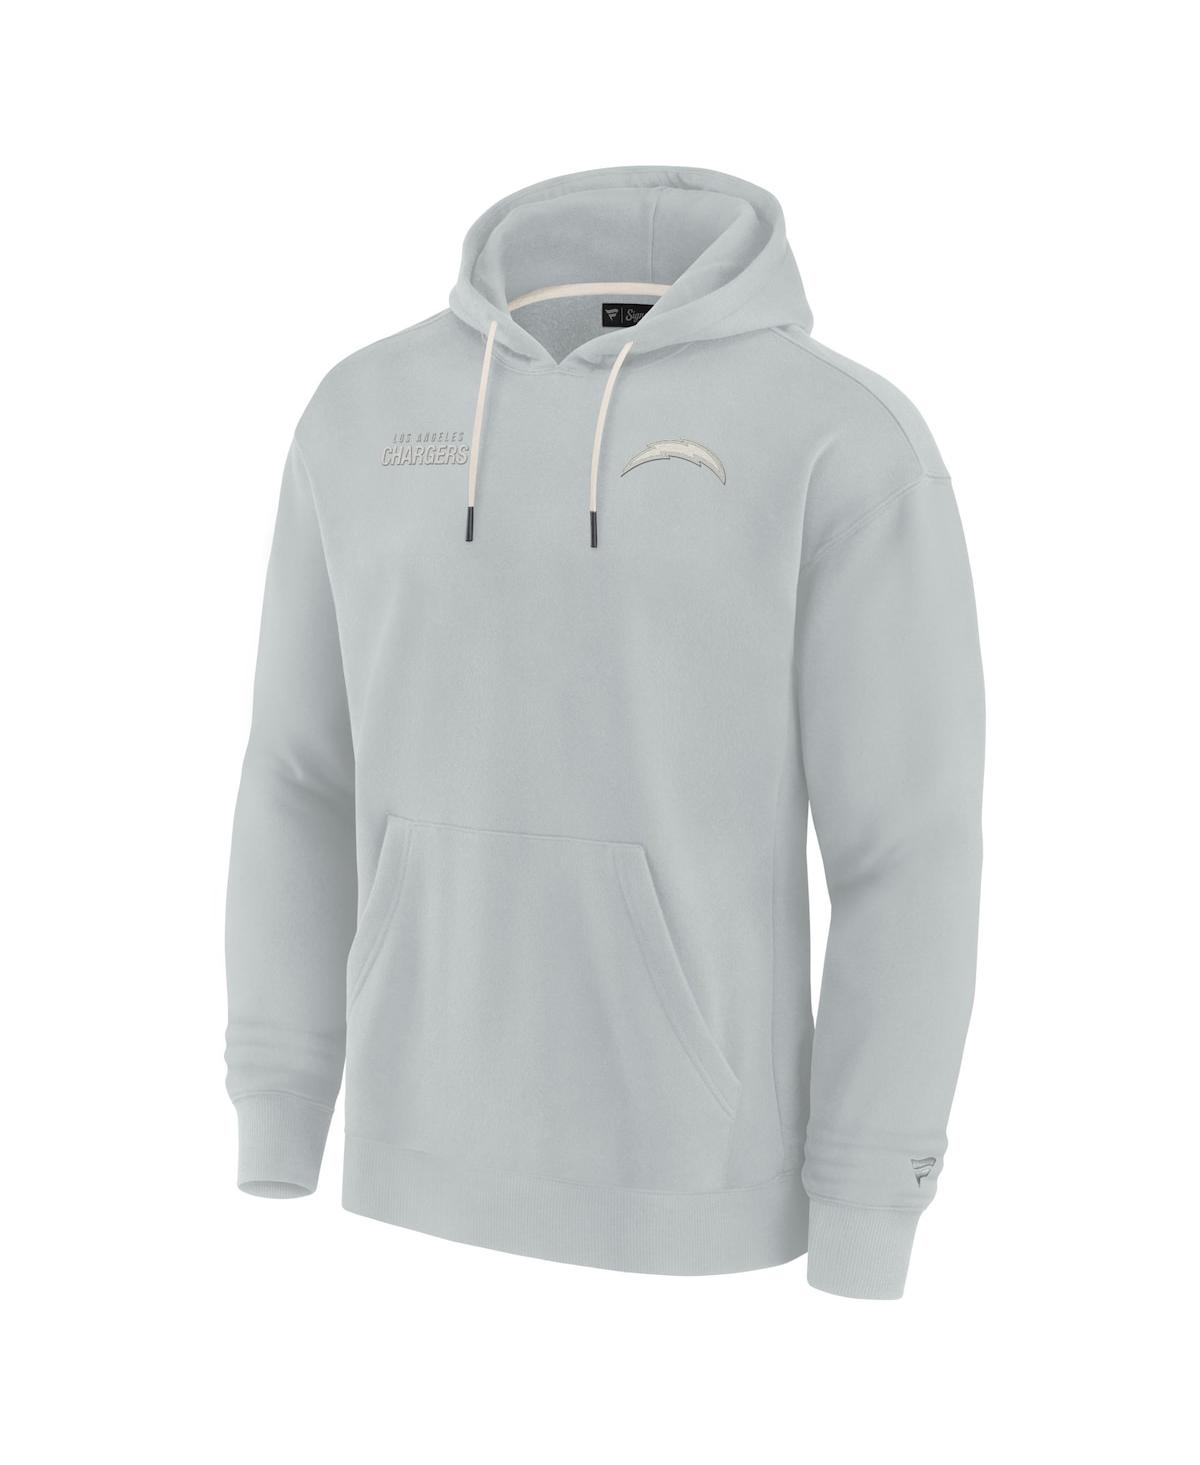 Shop Fanatics Signature Men's And Women's  Gray Los Angeles Chargers Super Soft Fleece Pullover Hoodie